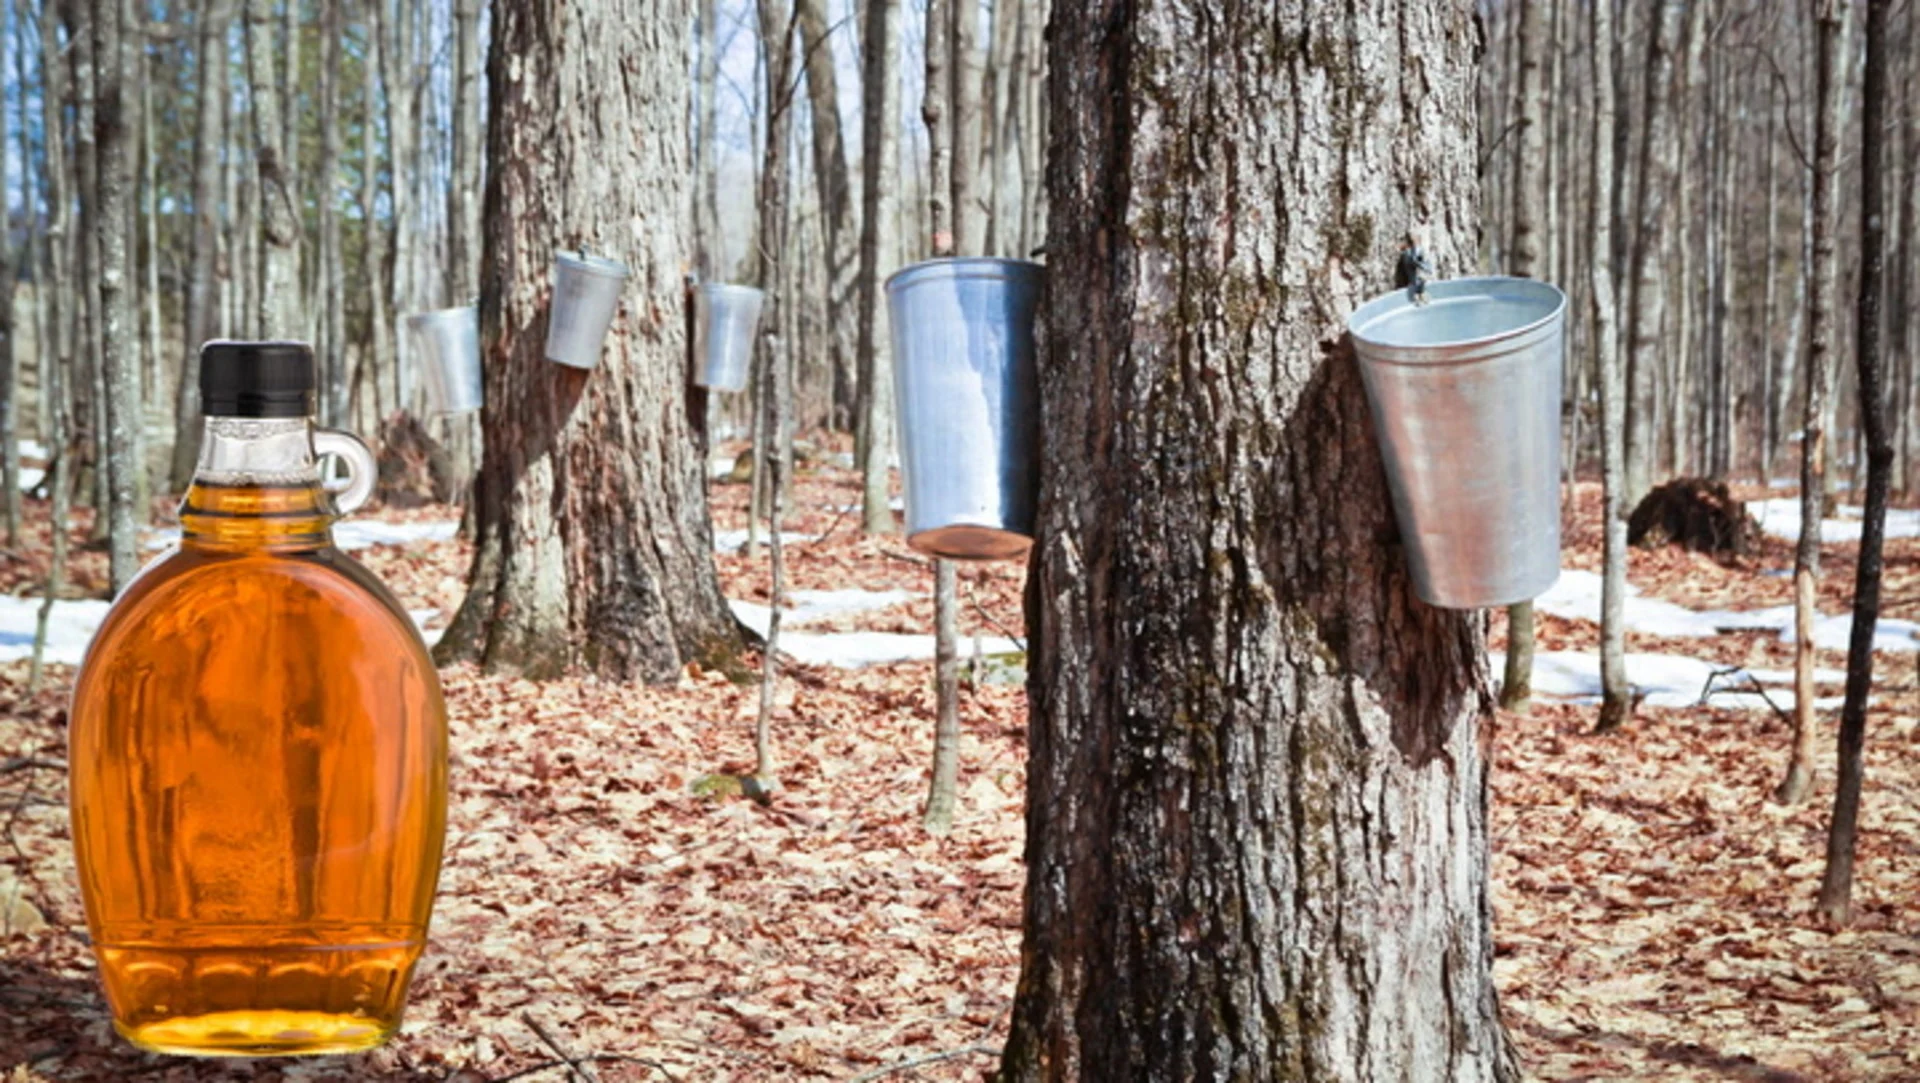 Maple syrup producers see early start to tapping season in Ontario